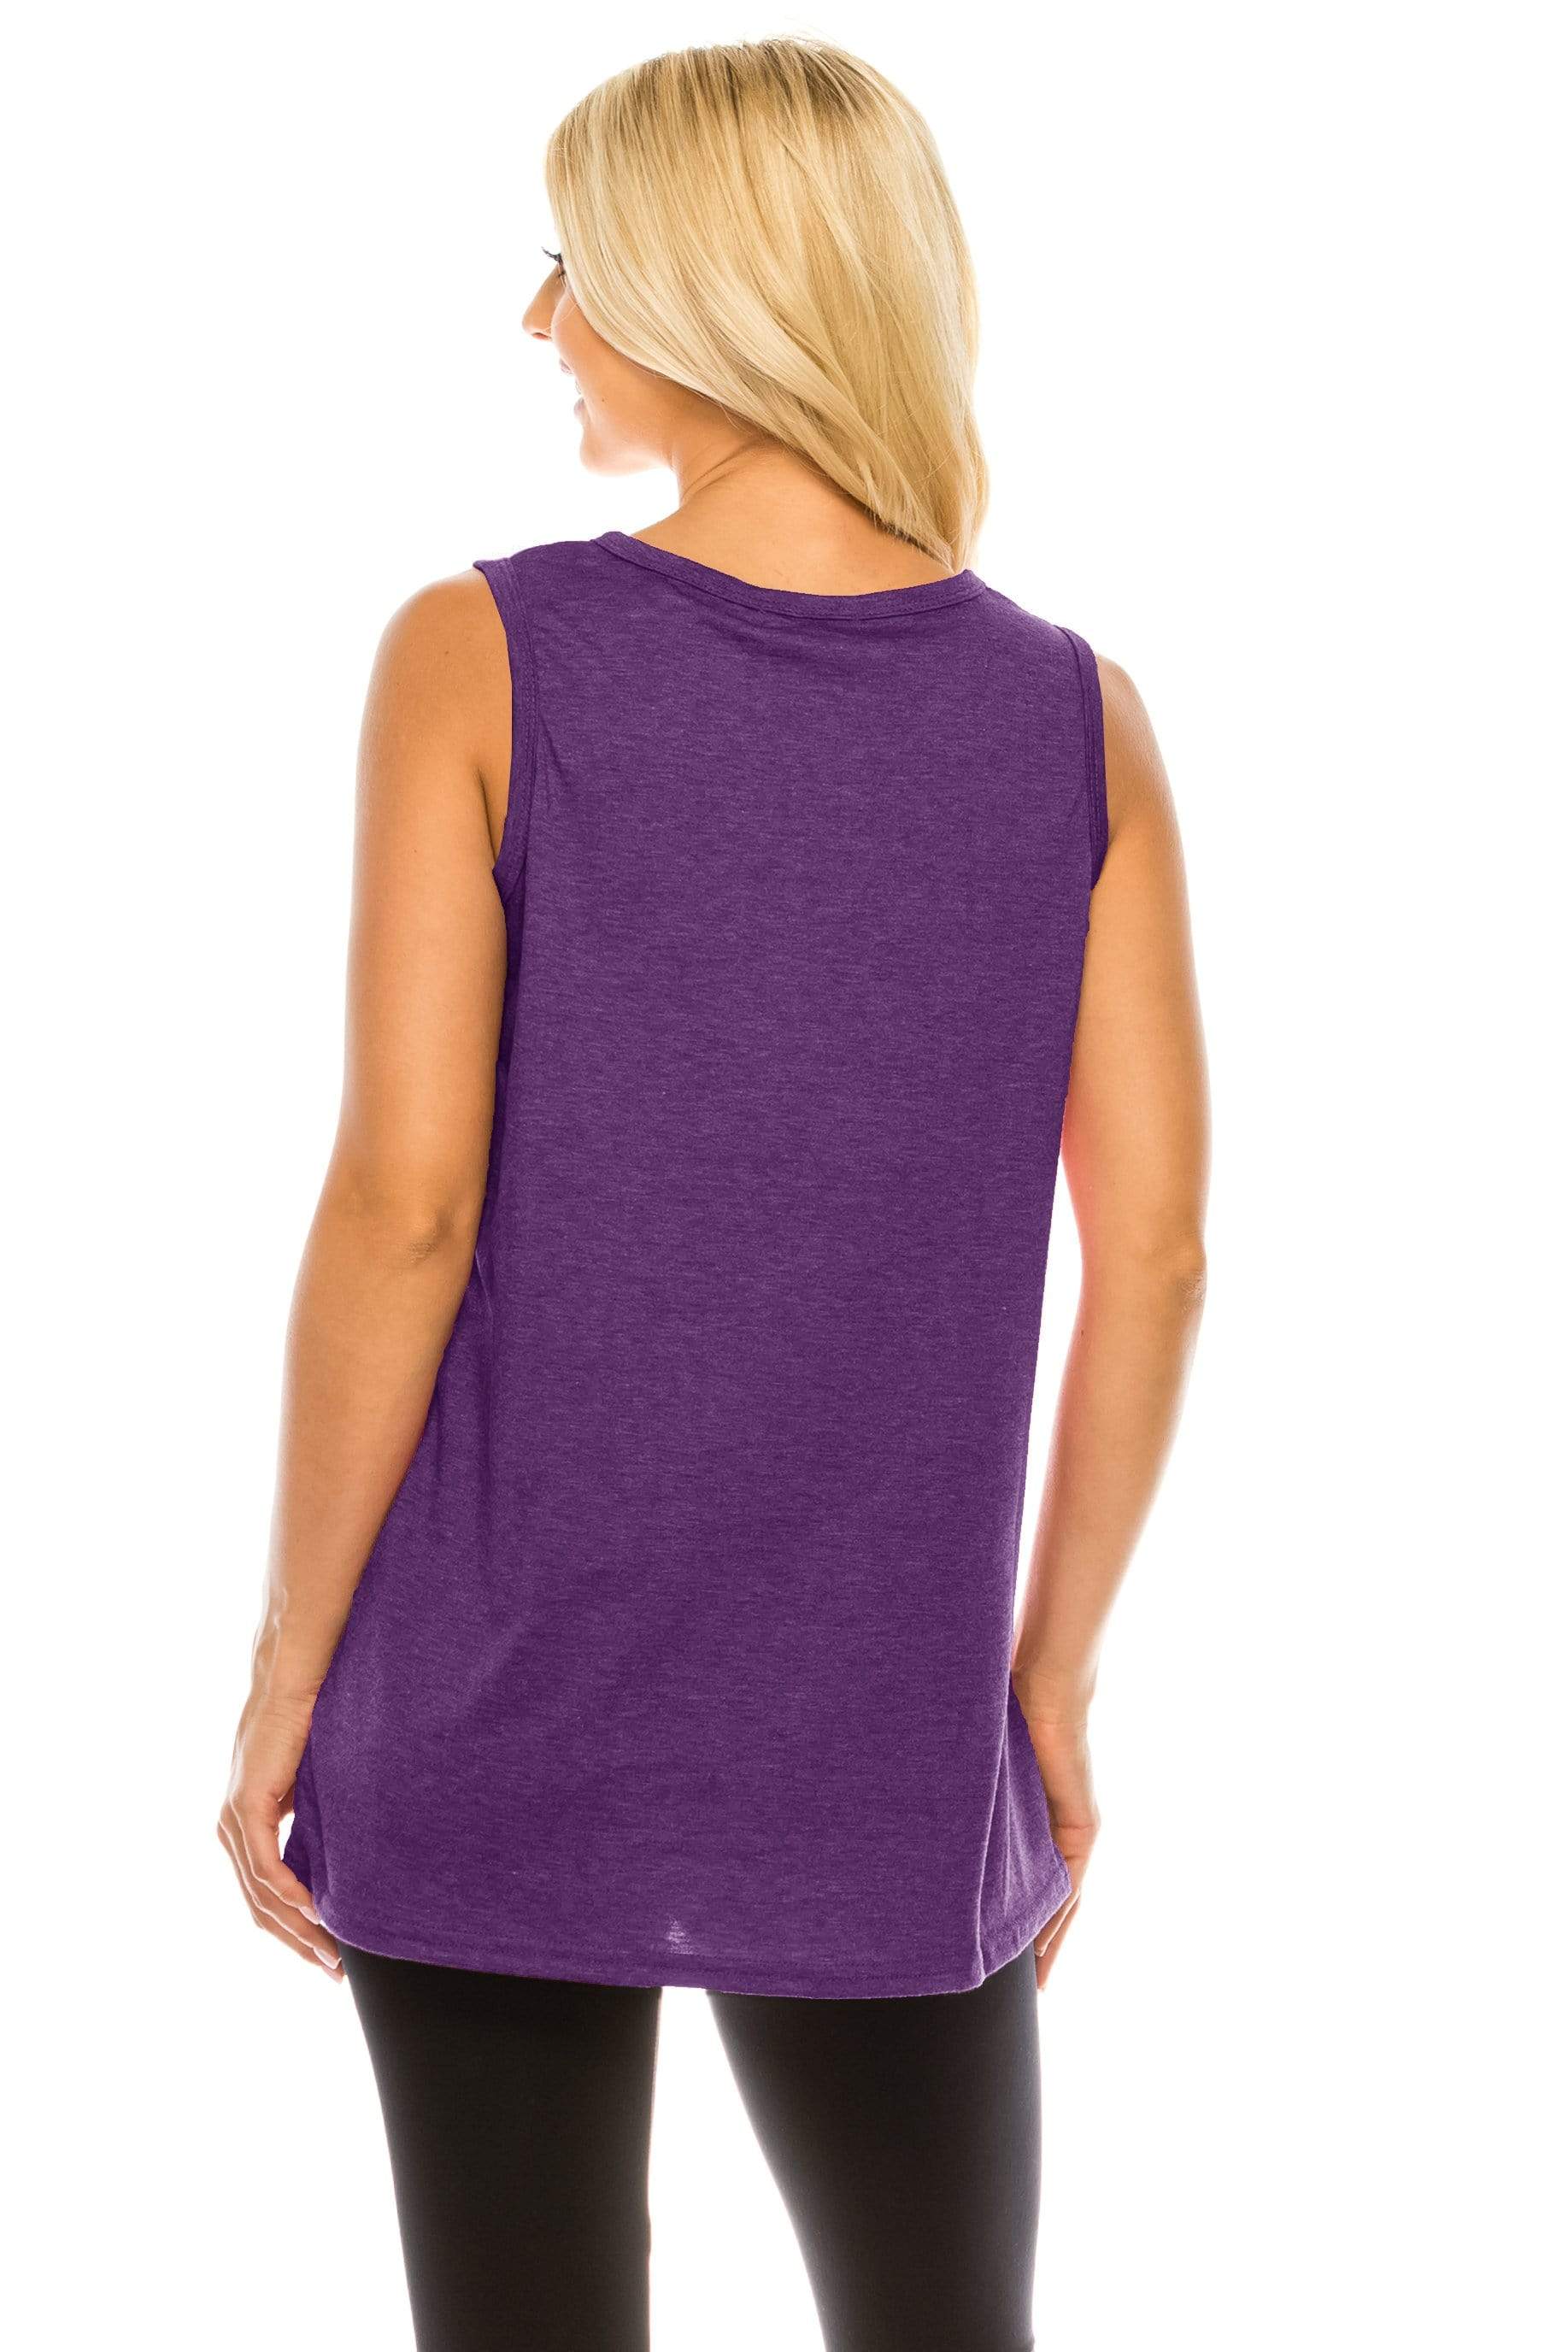 Haute Edition Women's Lazy Loose Fit Tank top. Plus size available Daily Haute